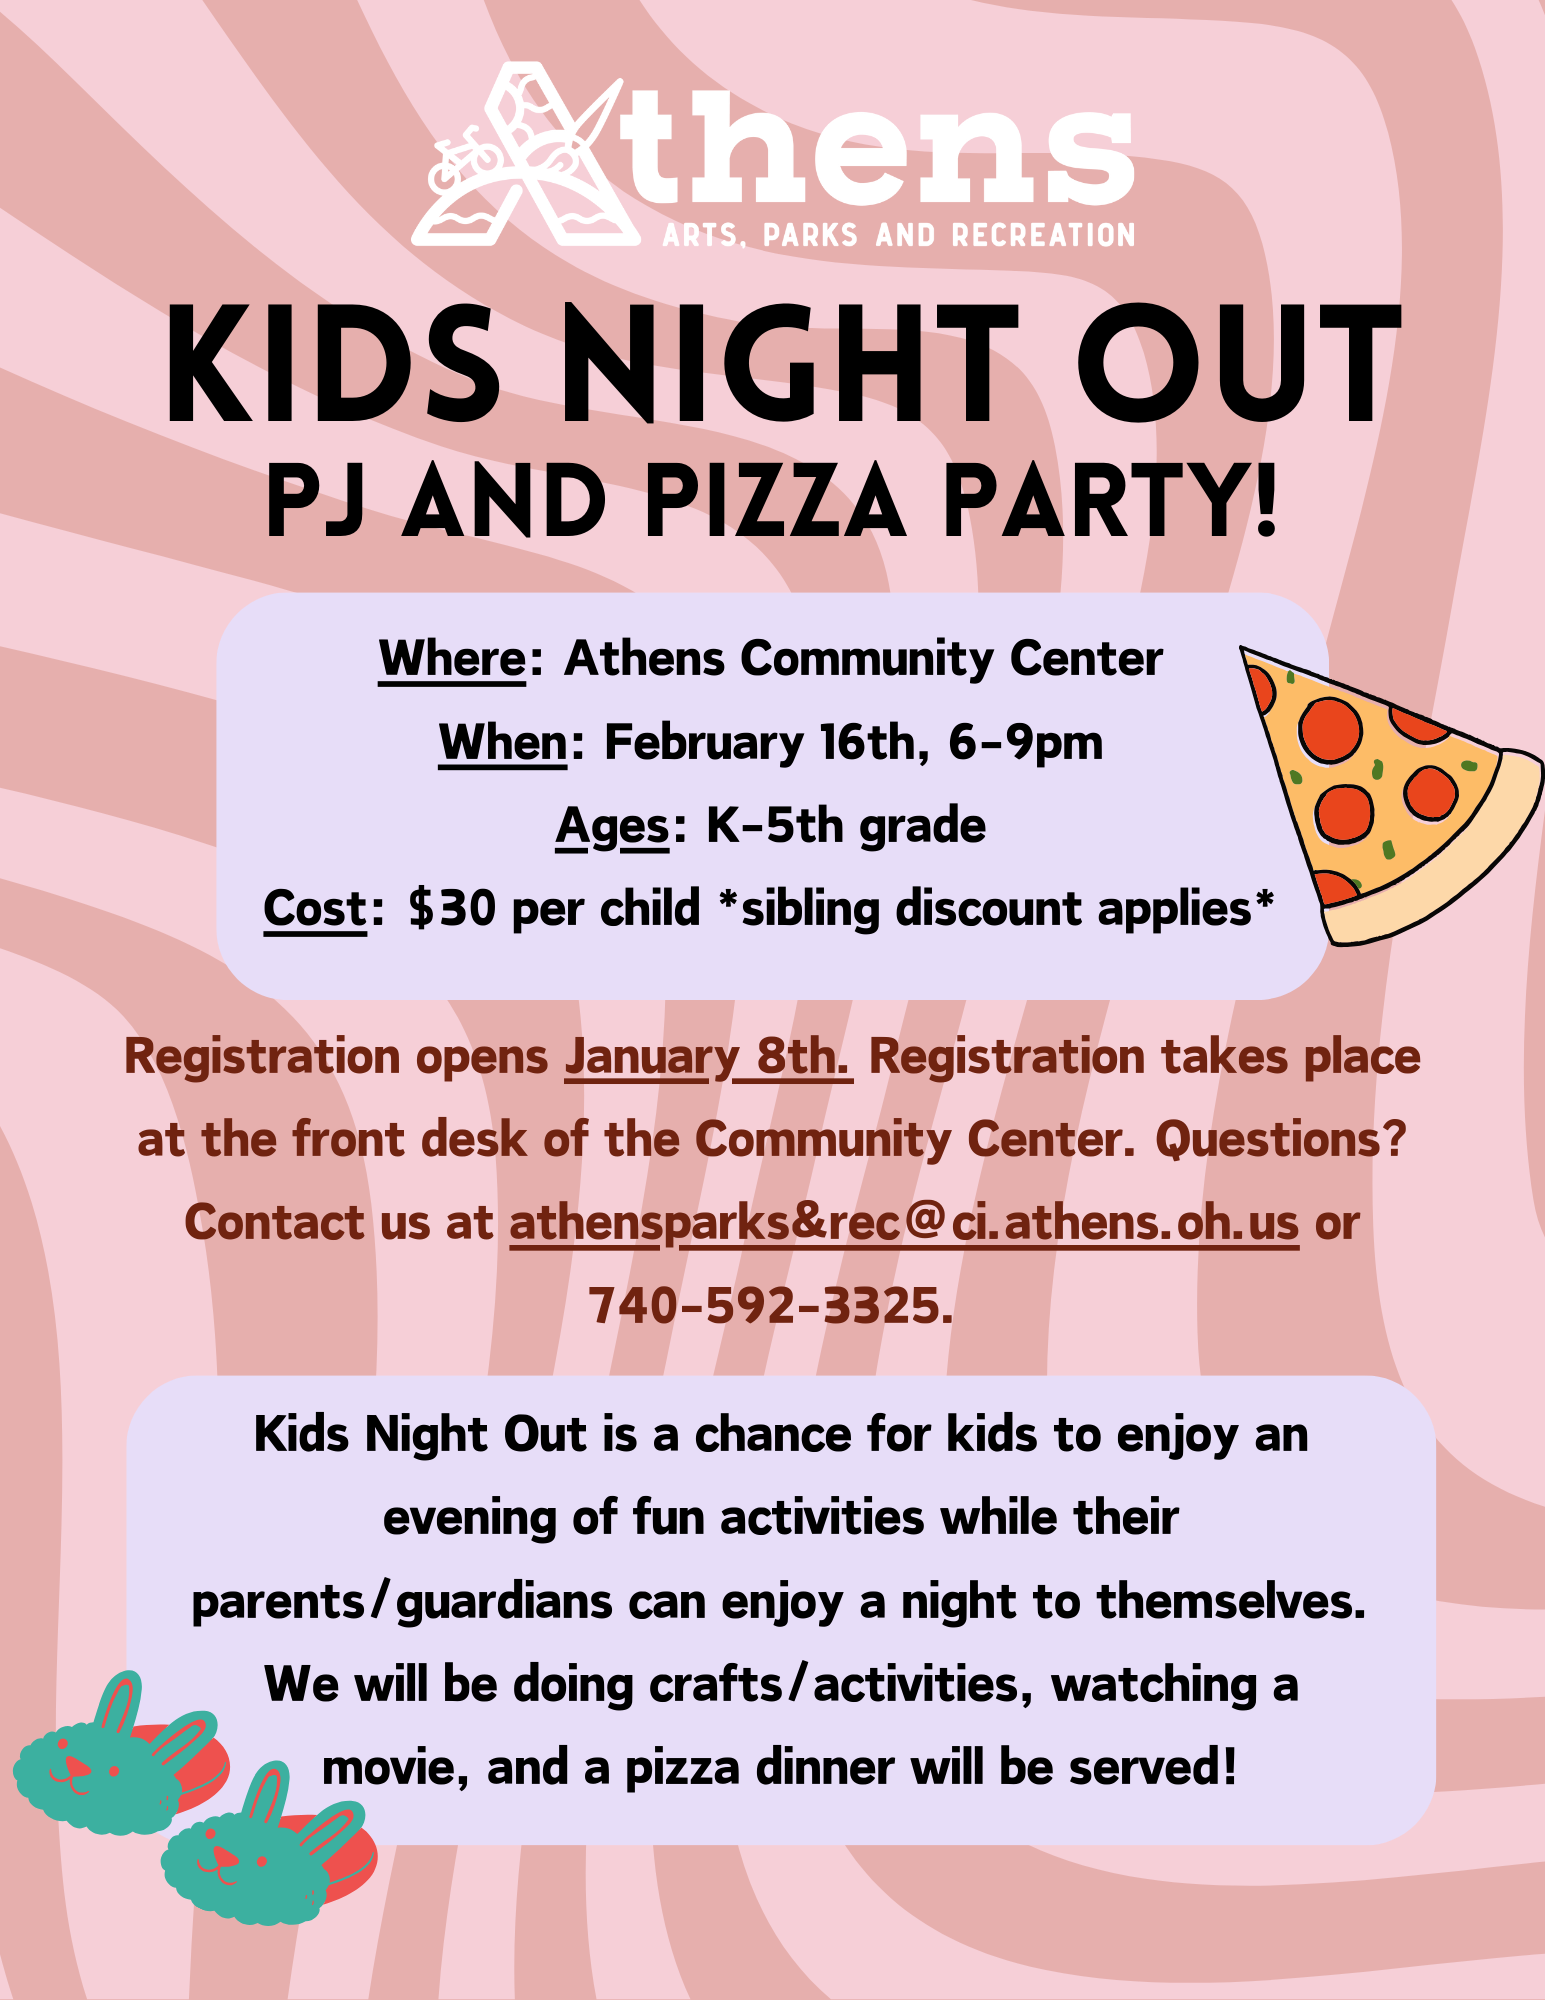 An image of the flyer for the Kid's Night Out event.